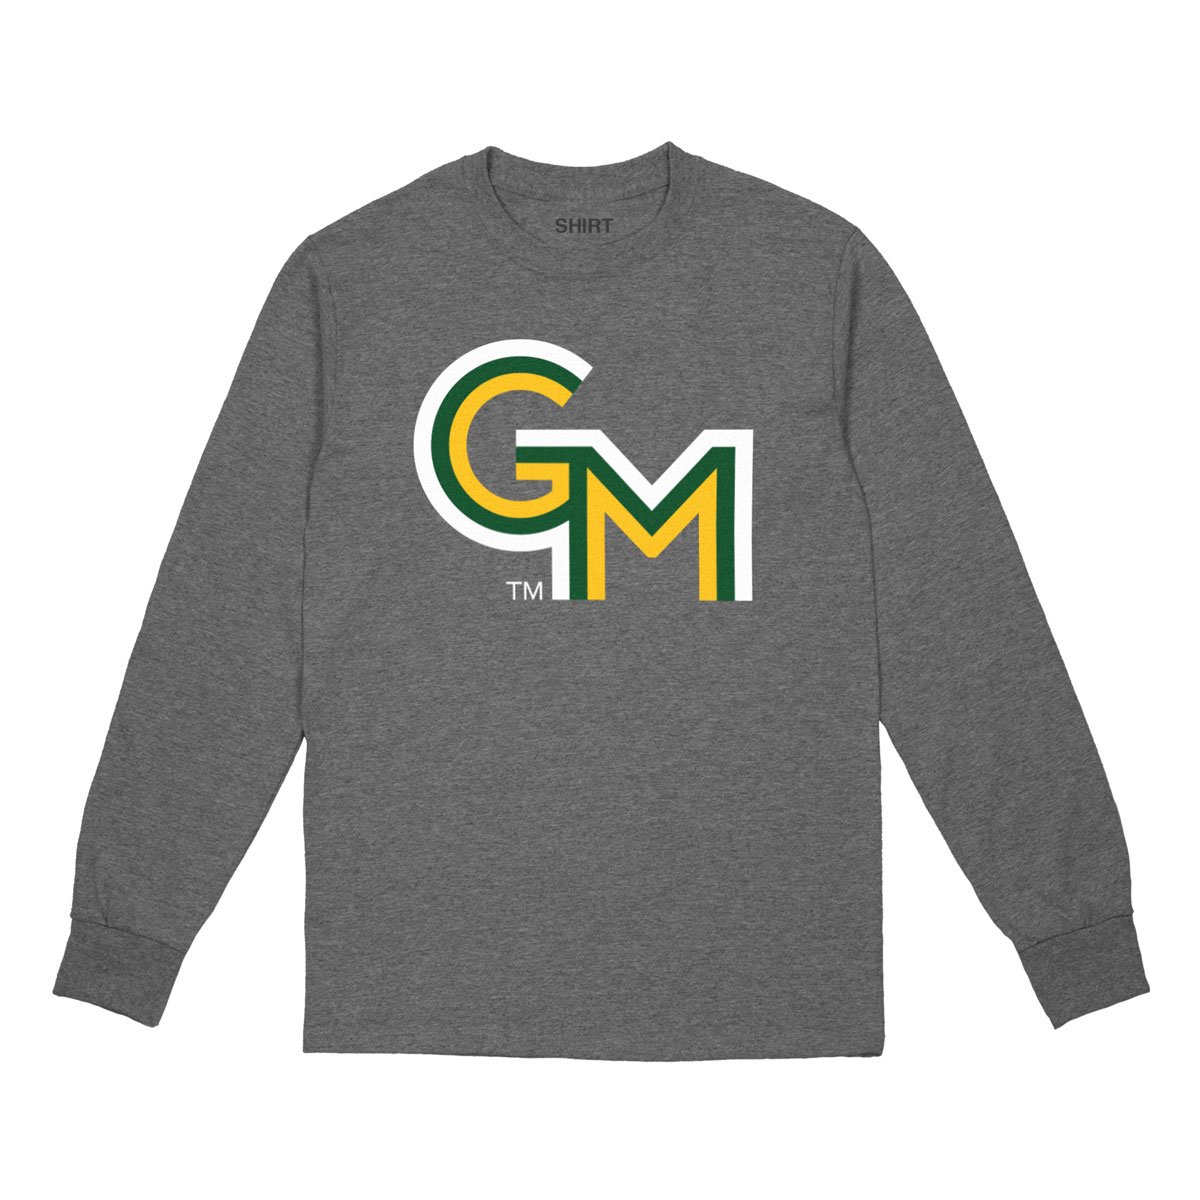 GM_FLAT_AU020H_GRAPHITE_FRONT_%23ATHLETICUNION.jpg